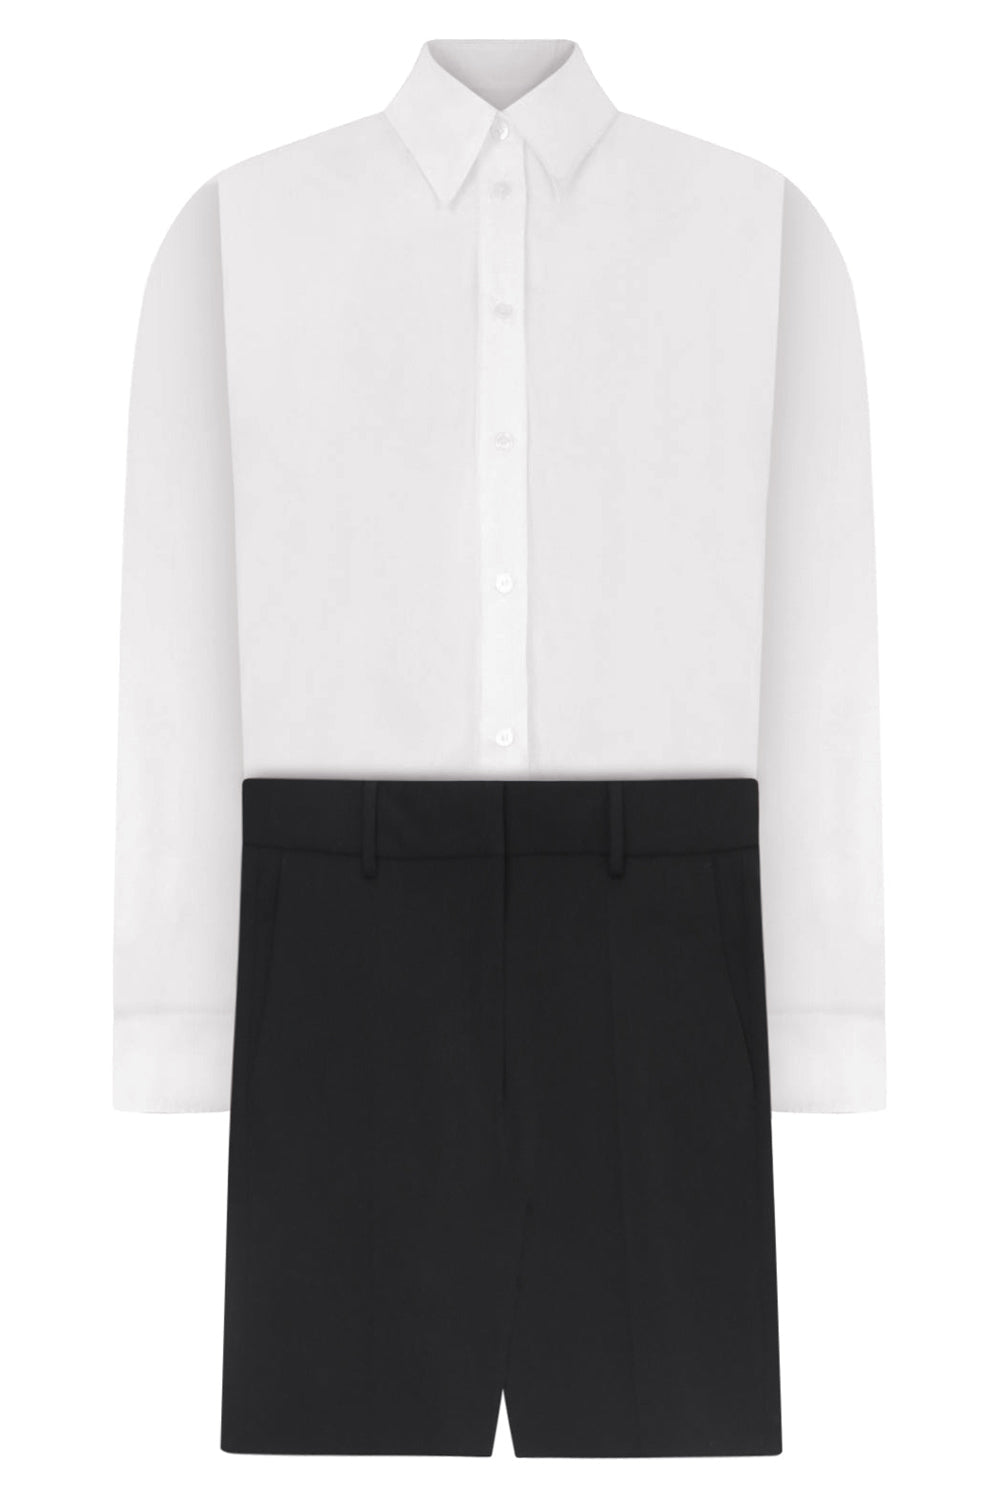 MM6 BY MAISON MARGIELA RTW SHIRT DRESS WITH ATTACHED SKIRT | WHITE / BLACK